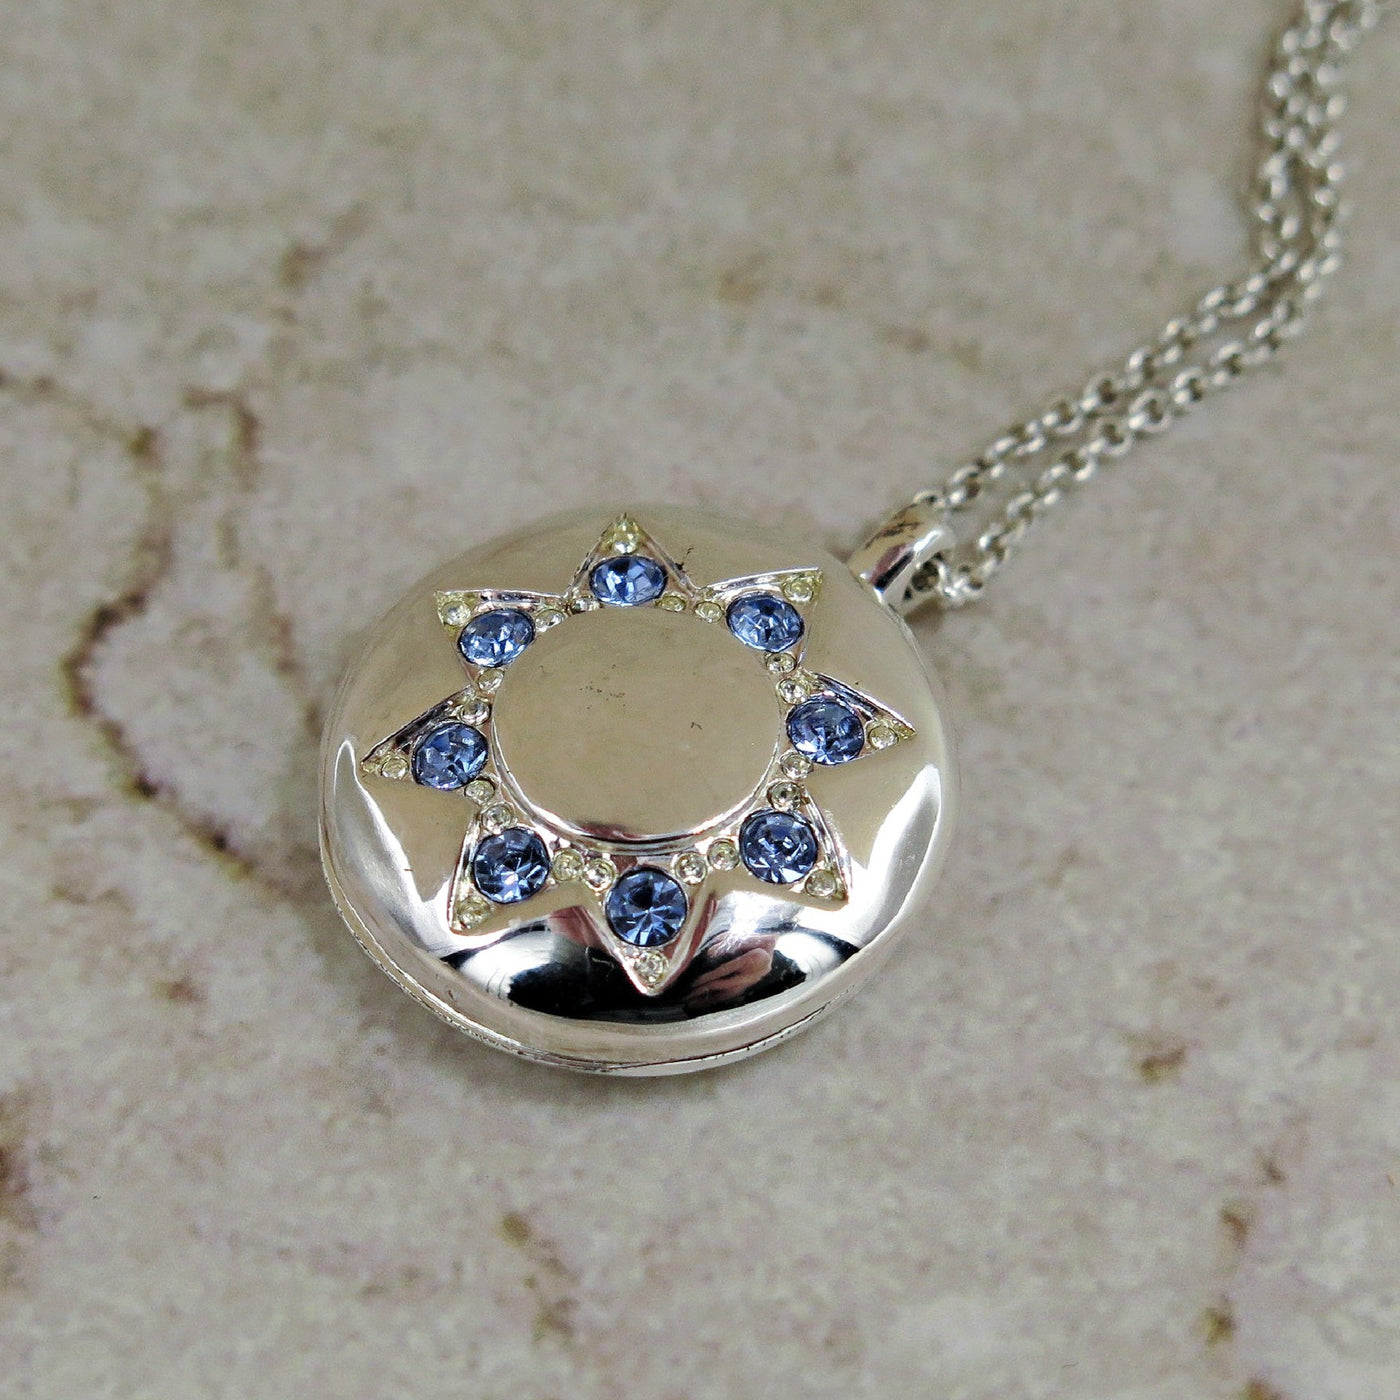 Silver Locket with Sapphire Star Inlay